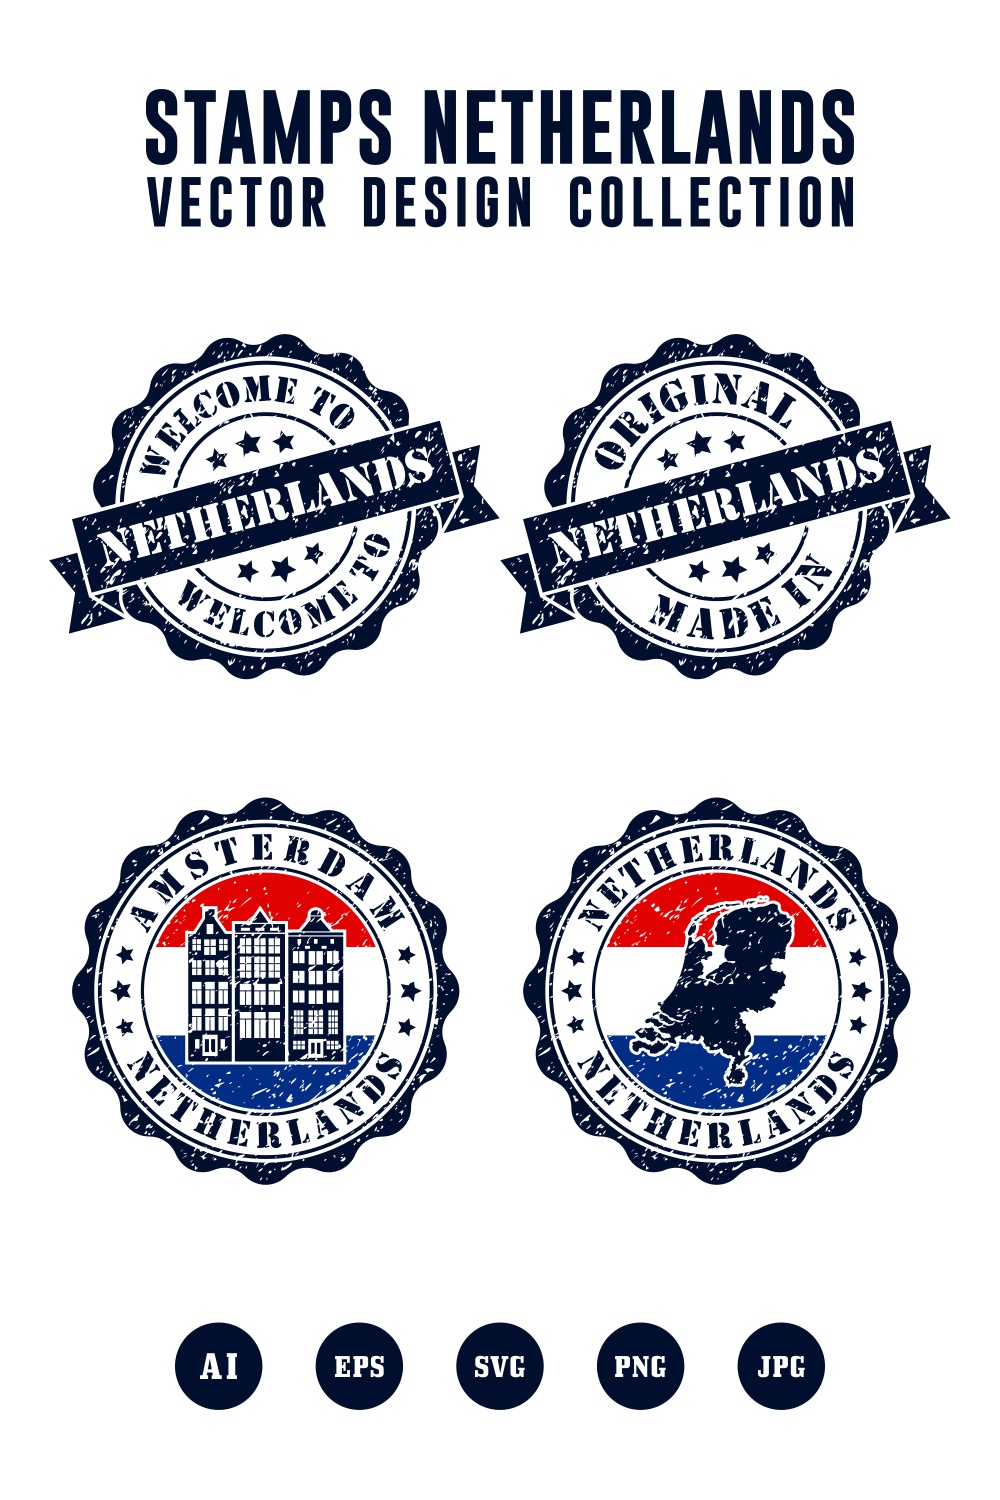 Welcome to Amsterdam Netherlands stamps logo design collection - $4 pinterest preview image.